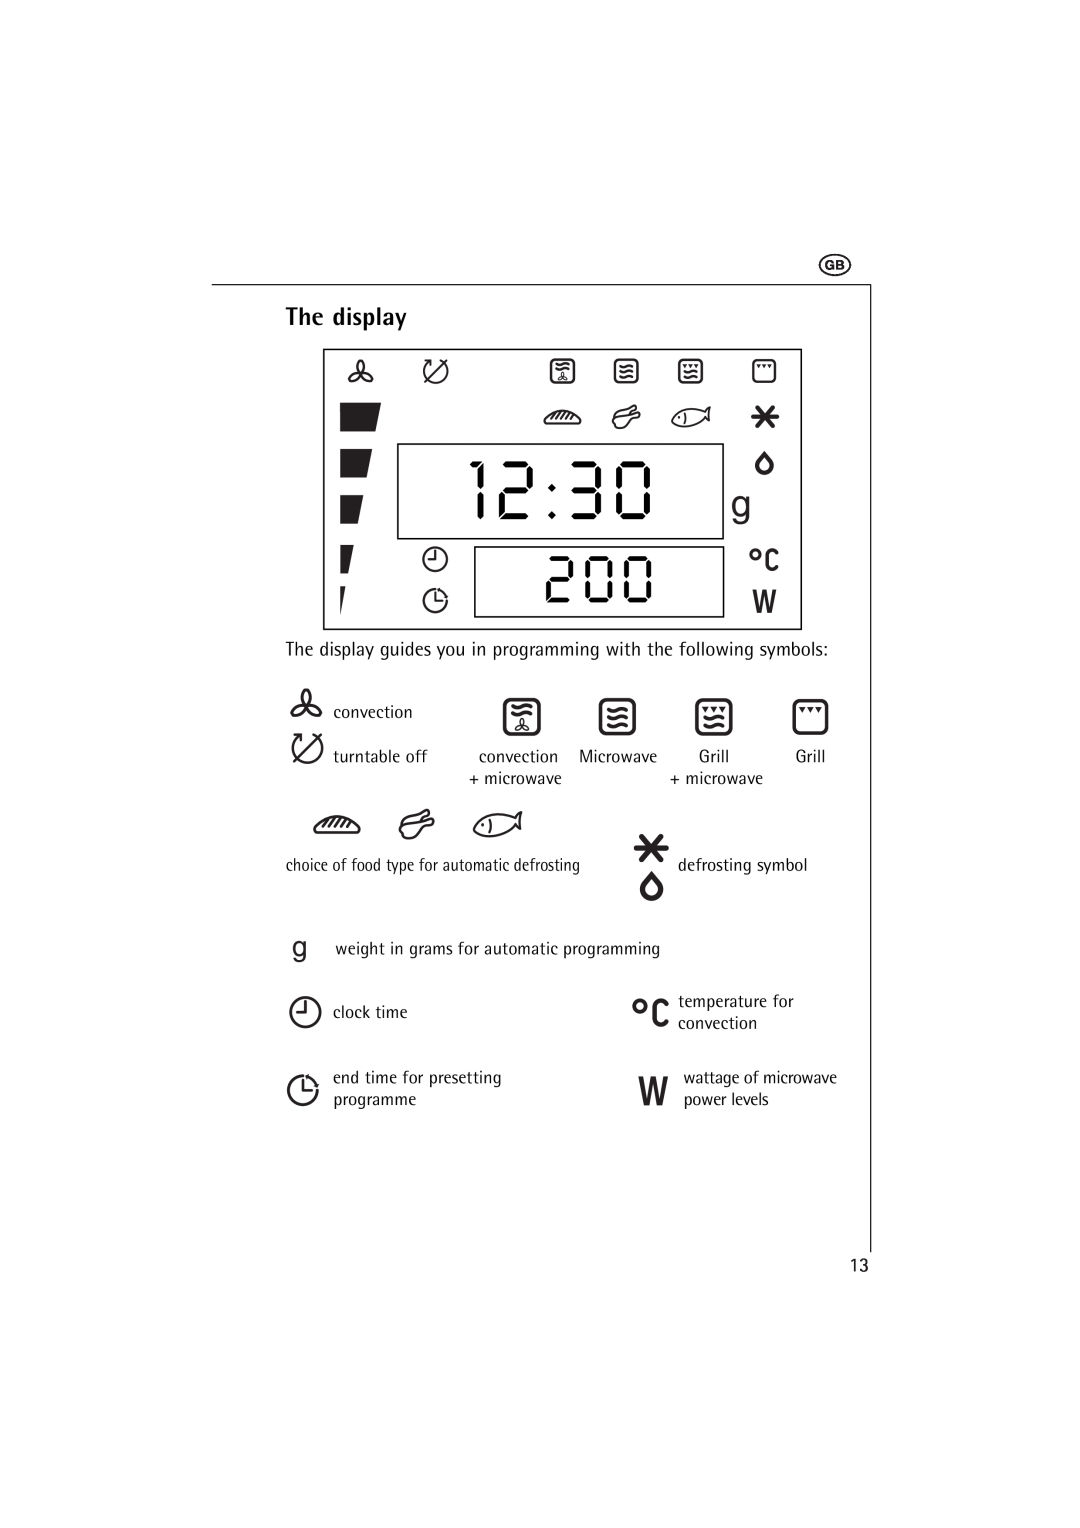 AEG MCC 663 instruction manual The display guides you in programming with the following symbols 